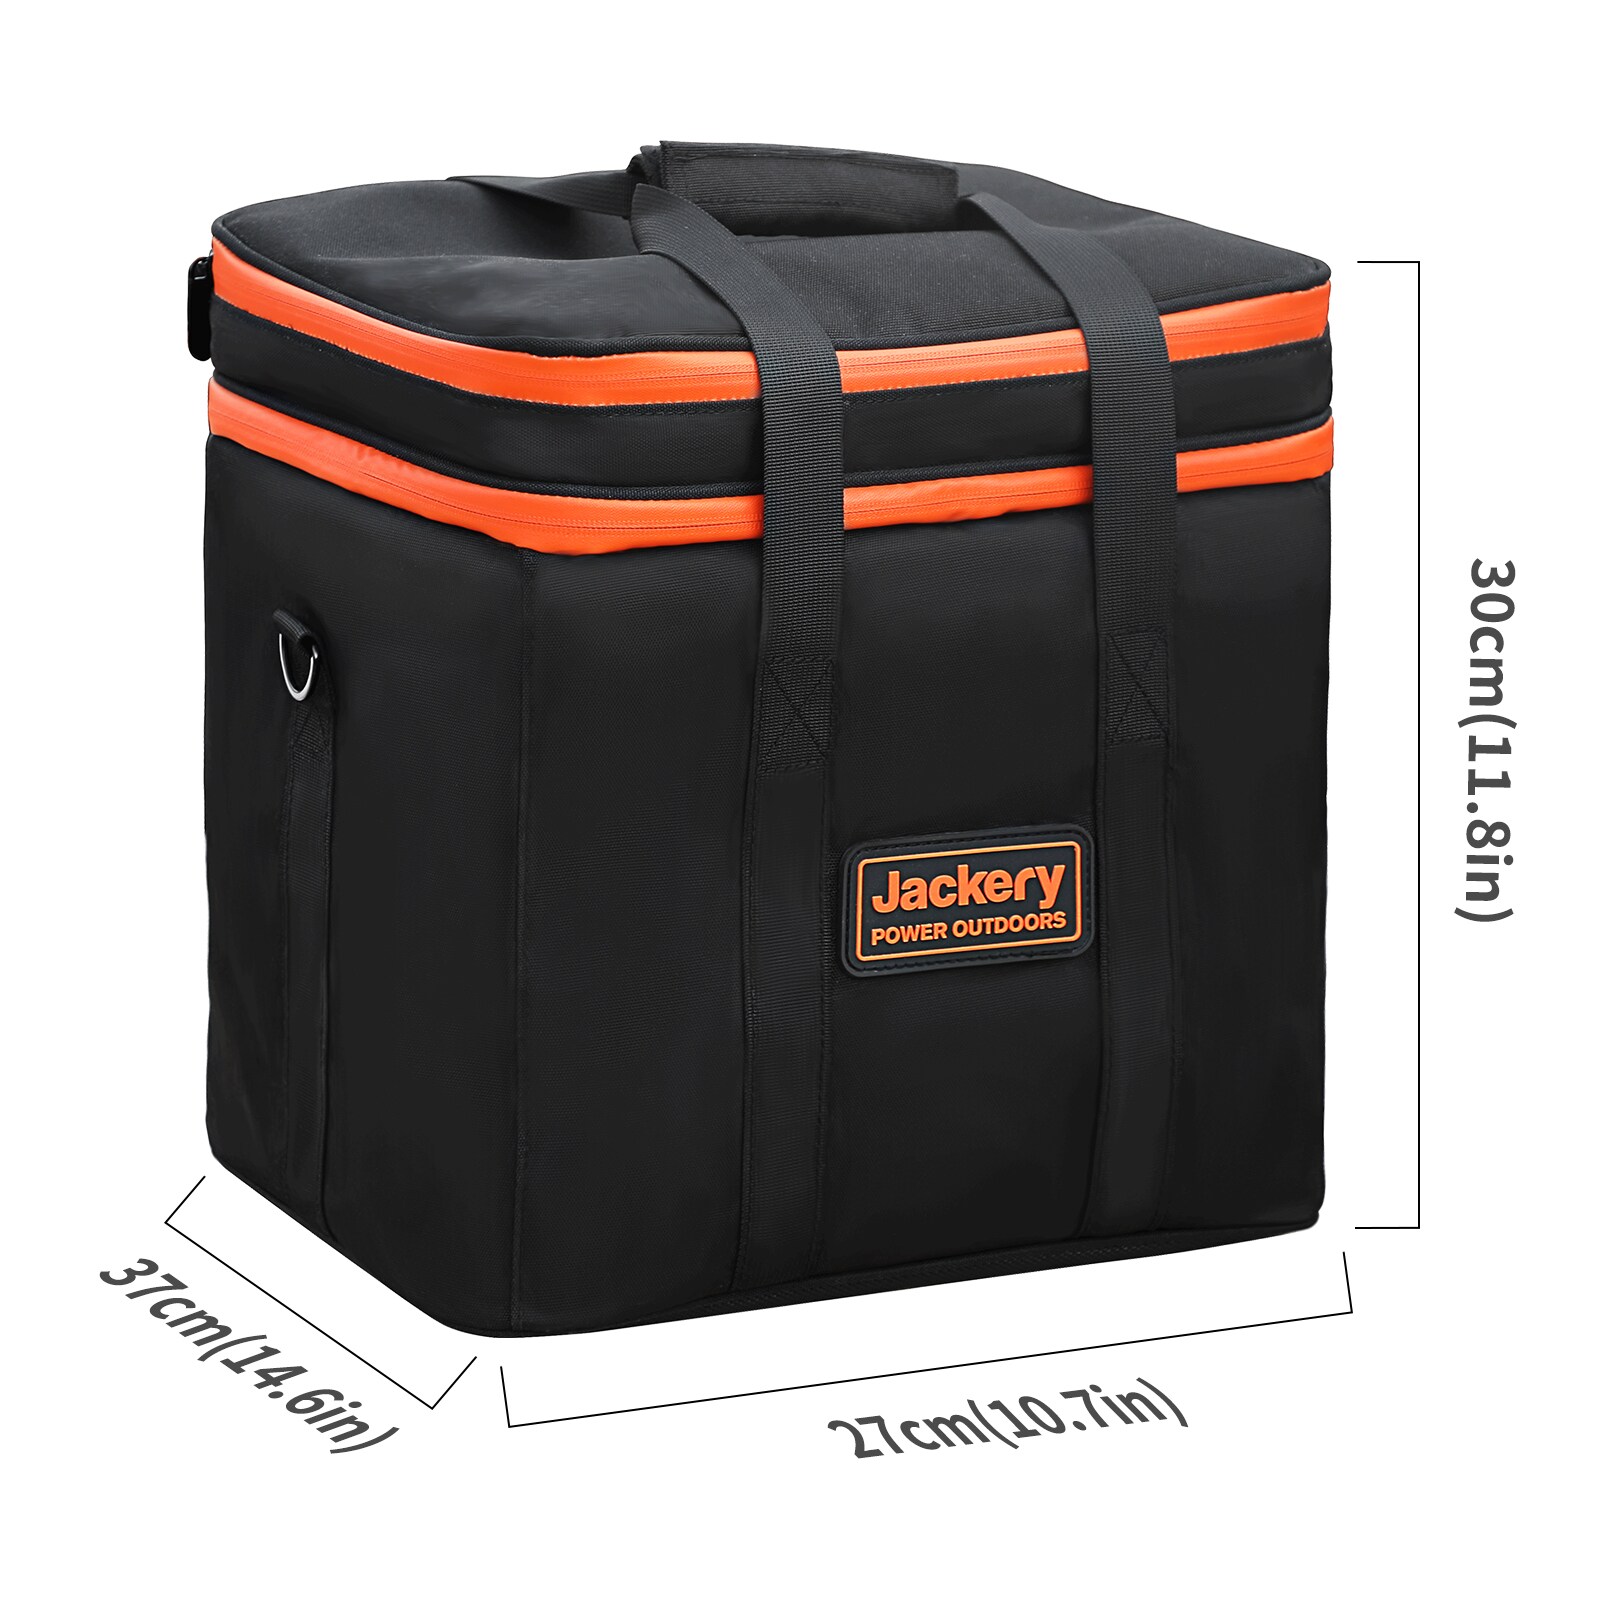 Jackery Upgraded Carrying Case Bag for Explorer 880/1000/1000 Pro (M)